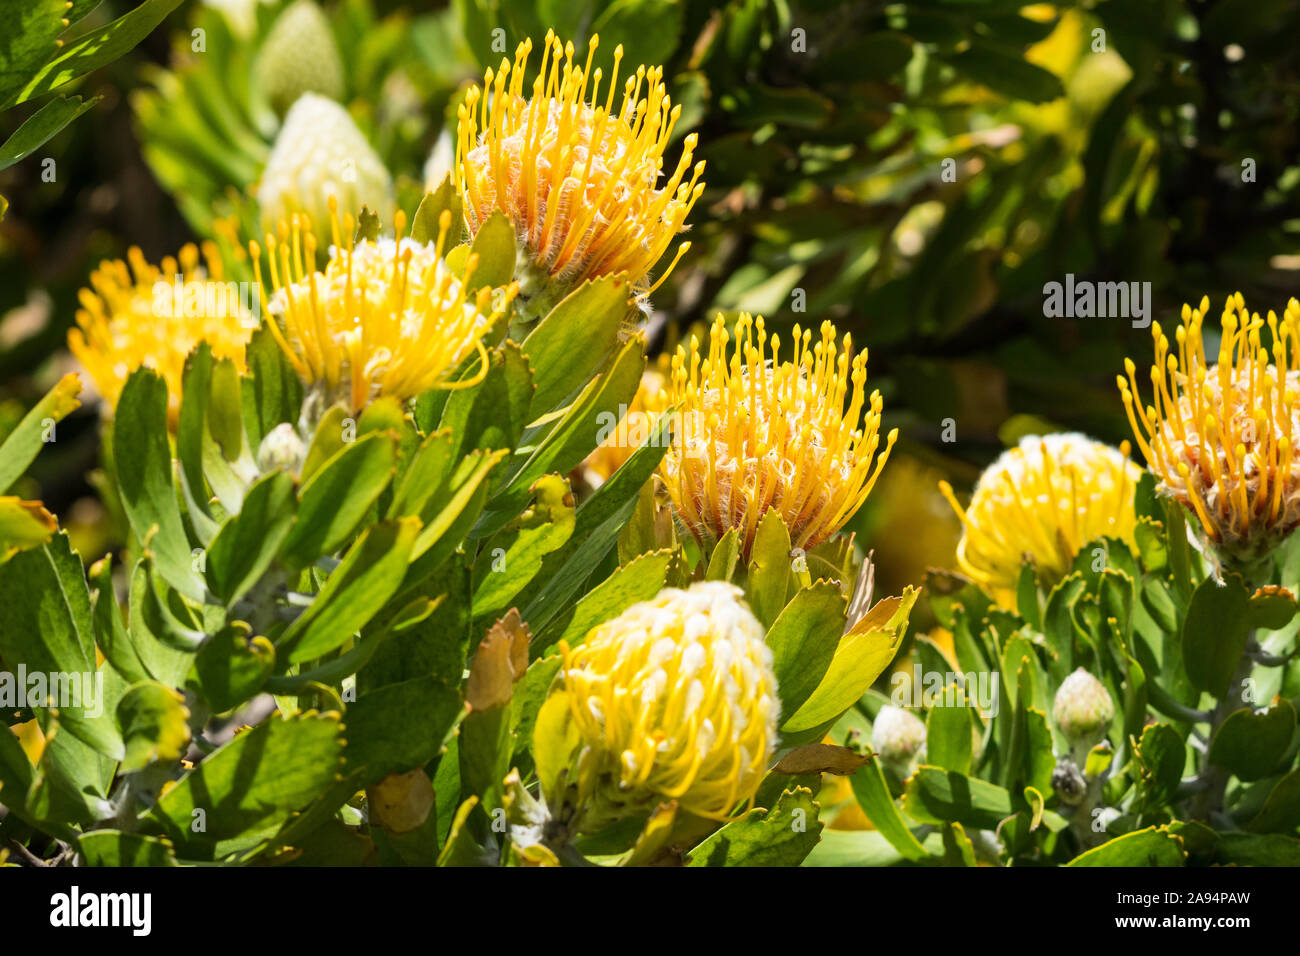 Pincushion proteas or Leucospermum indigenous flowers in the sun on a bush or shrub in a garden in Cape Town, South Africa Stock Photo